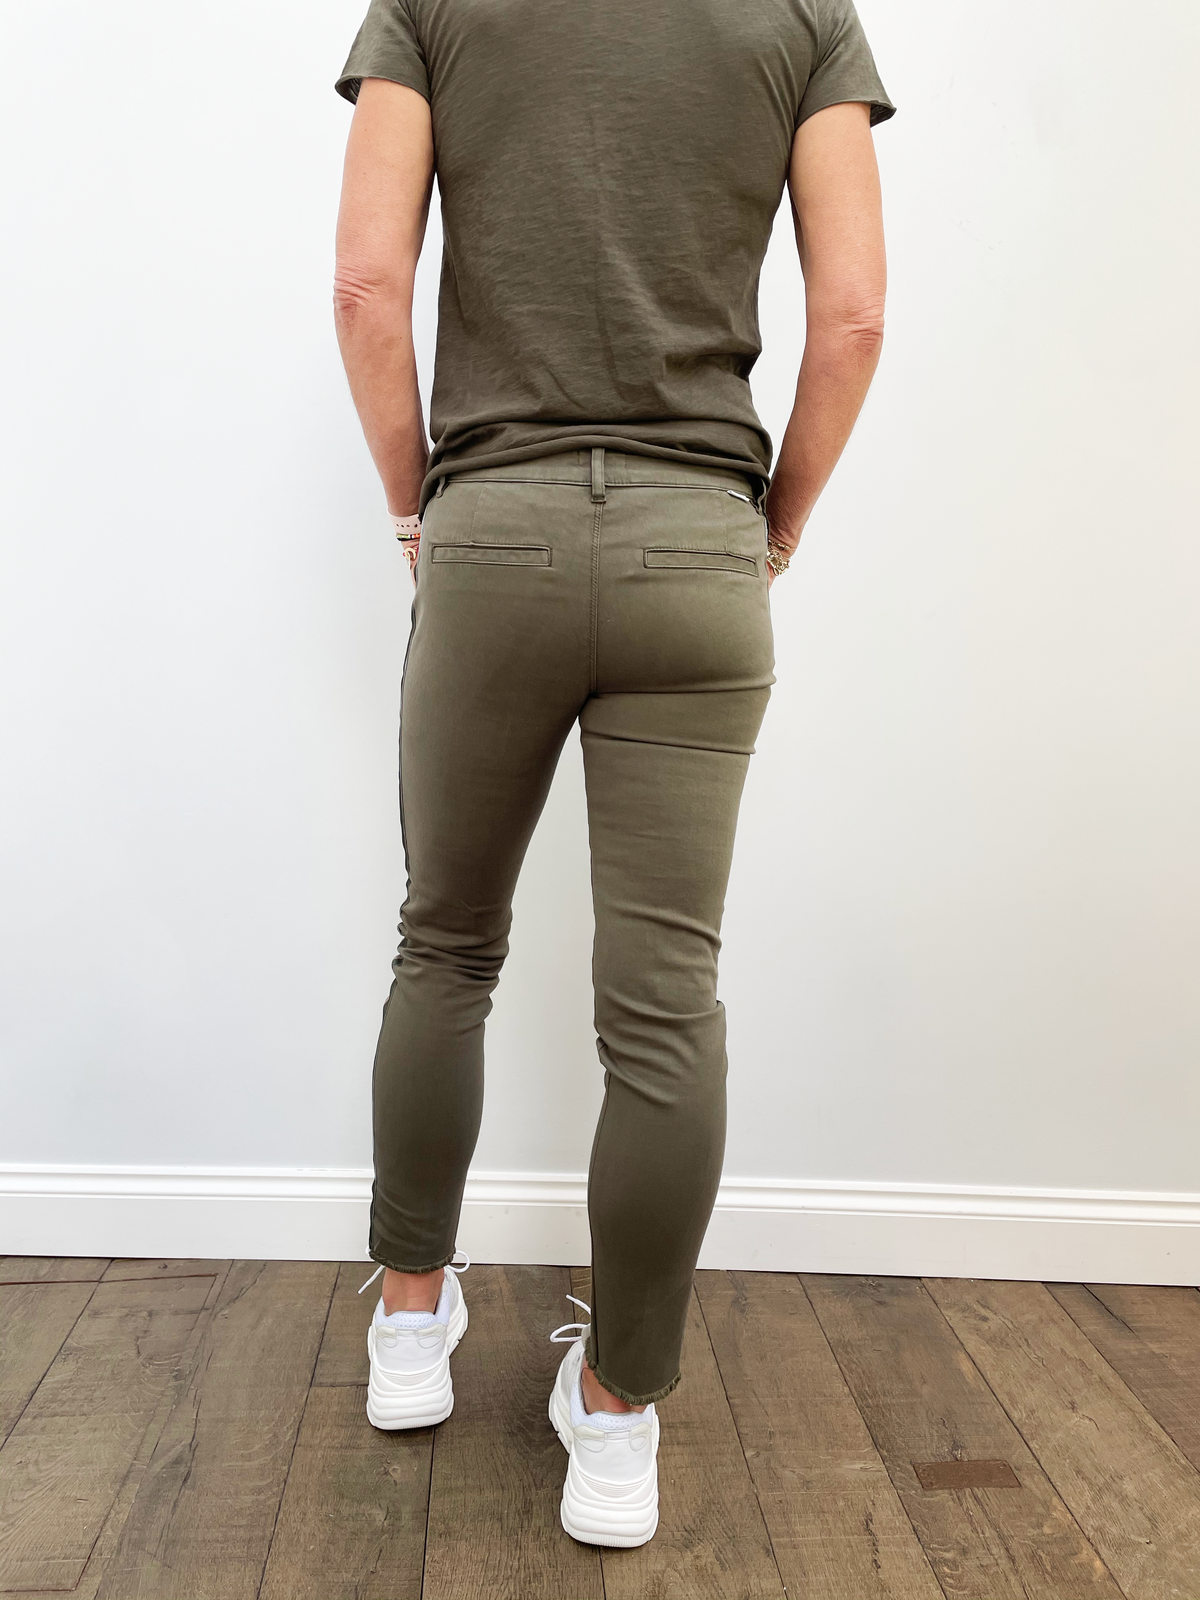 FIVE Cathy Cigarette Pant With Braid in Ivy Green